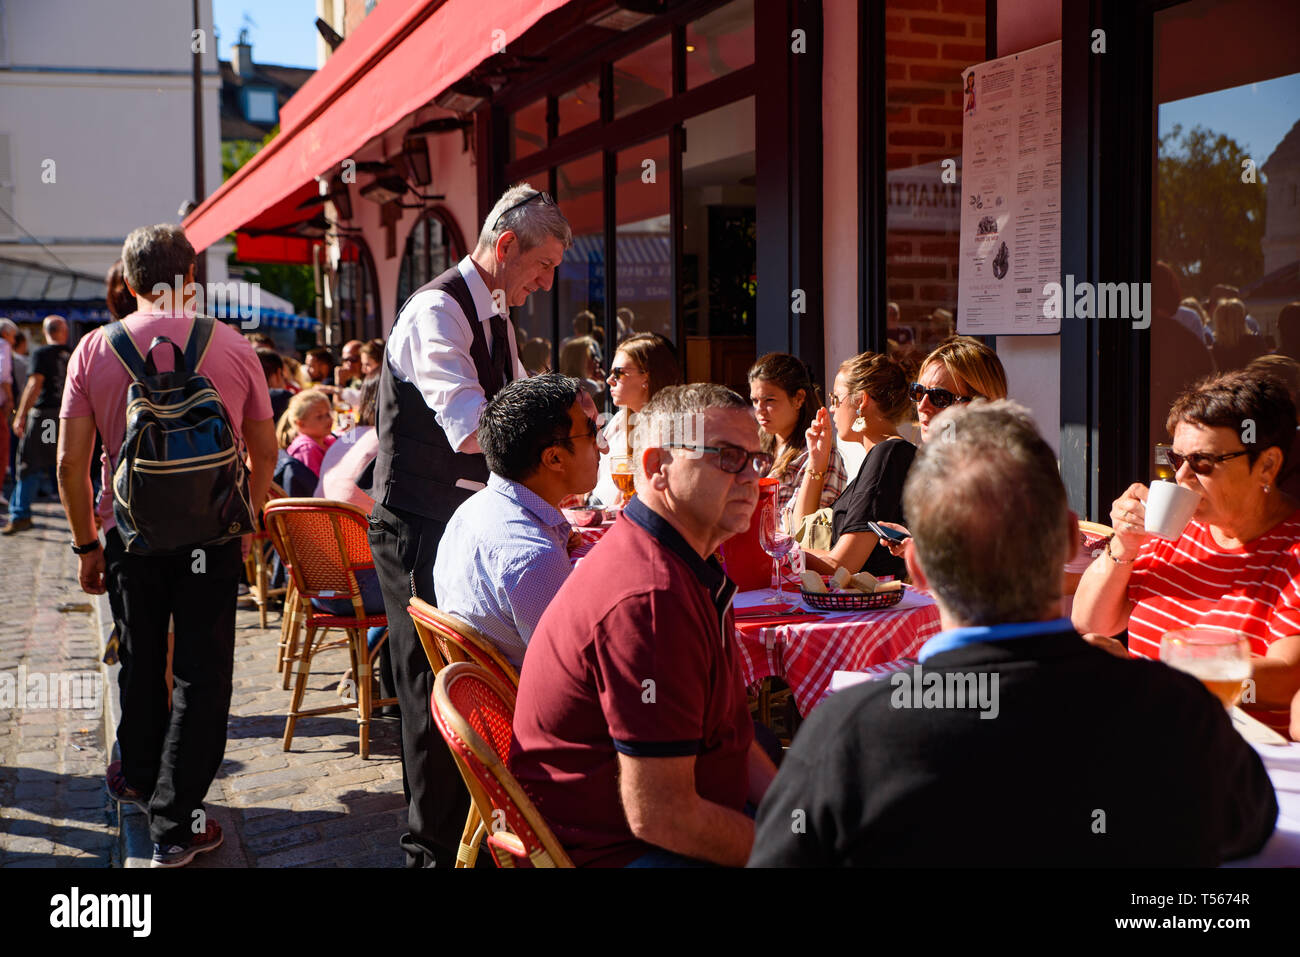 People eating at the outdoor seating in Montmartre, France Stock Photo